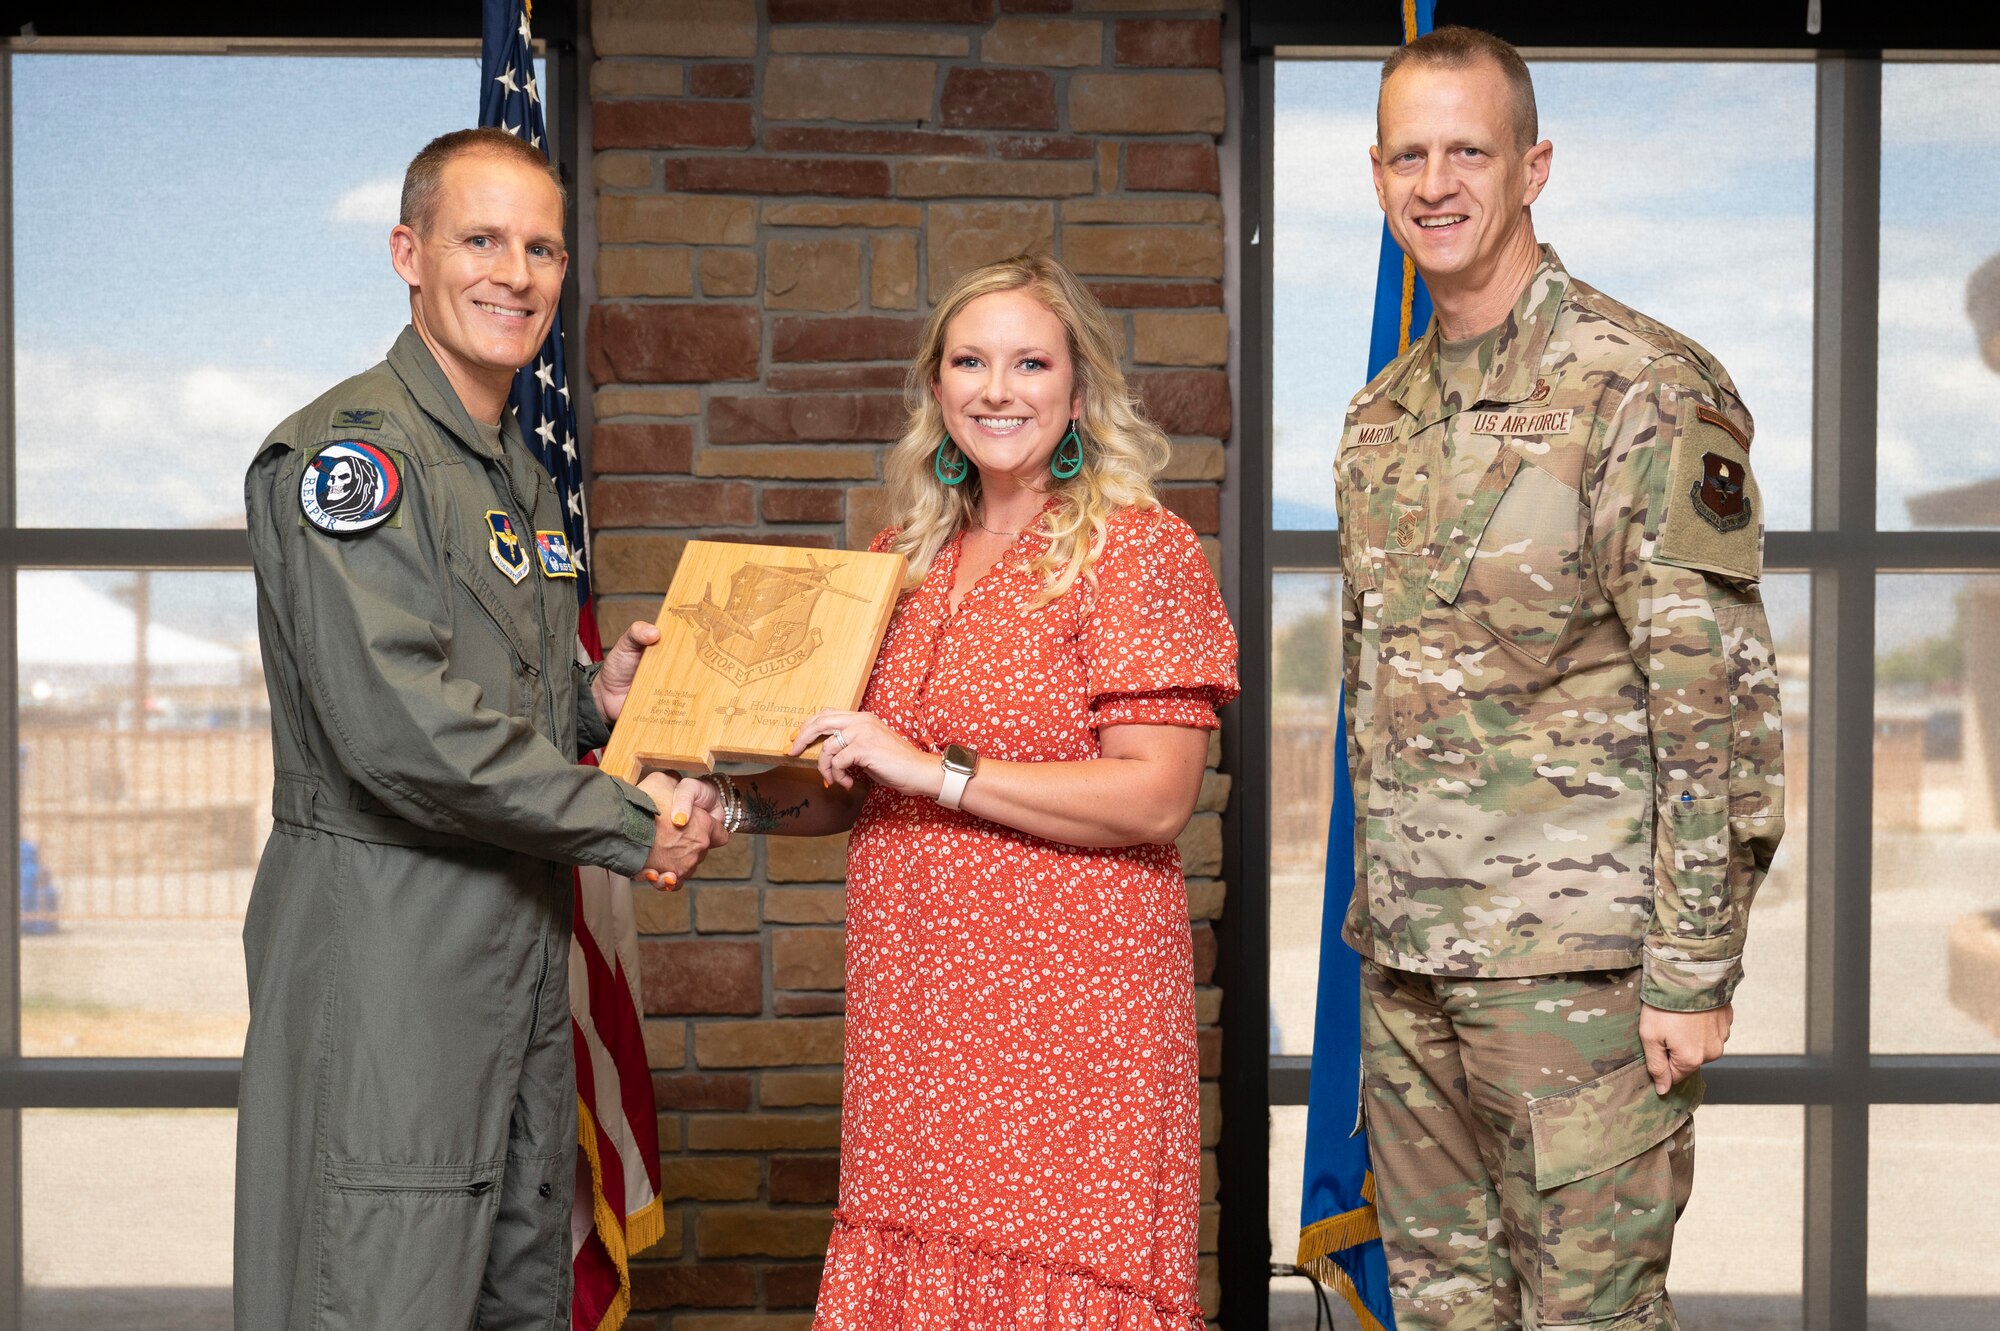 Mrs. Molly Muse, 29th Attack Squadron key spouse, accepts the 49th Wing Key Spouse of the Quarter Award, during the 49th Wing’s 2nd Quarter Award ceremony at Holloman Air Force Base, New Mexico, Aug. 11, 2023. Quarterly award winners were selected based on their technical expertise, demonstration of leadership and job performance. (U.S. Air Force photo by Airman 1st Class Michelle Ferrari)